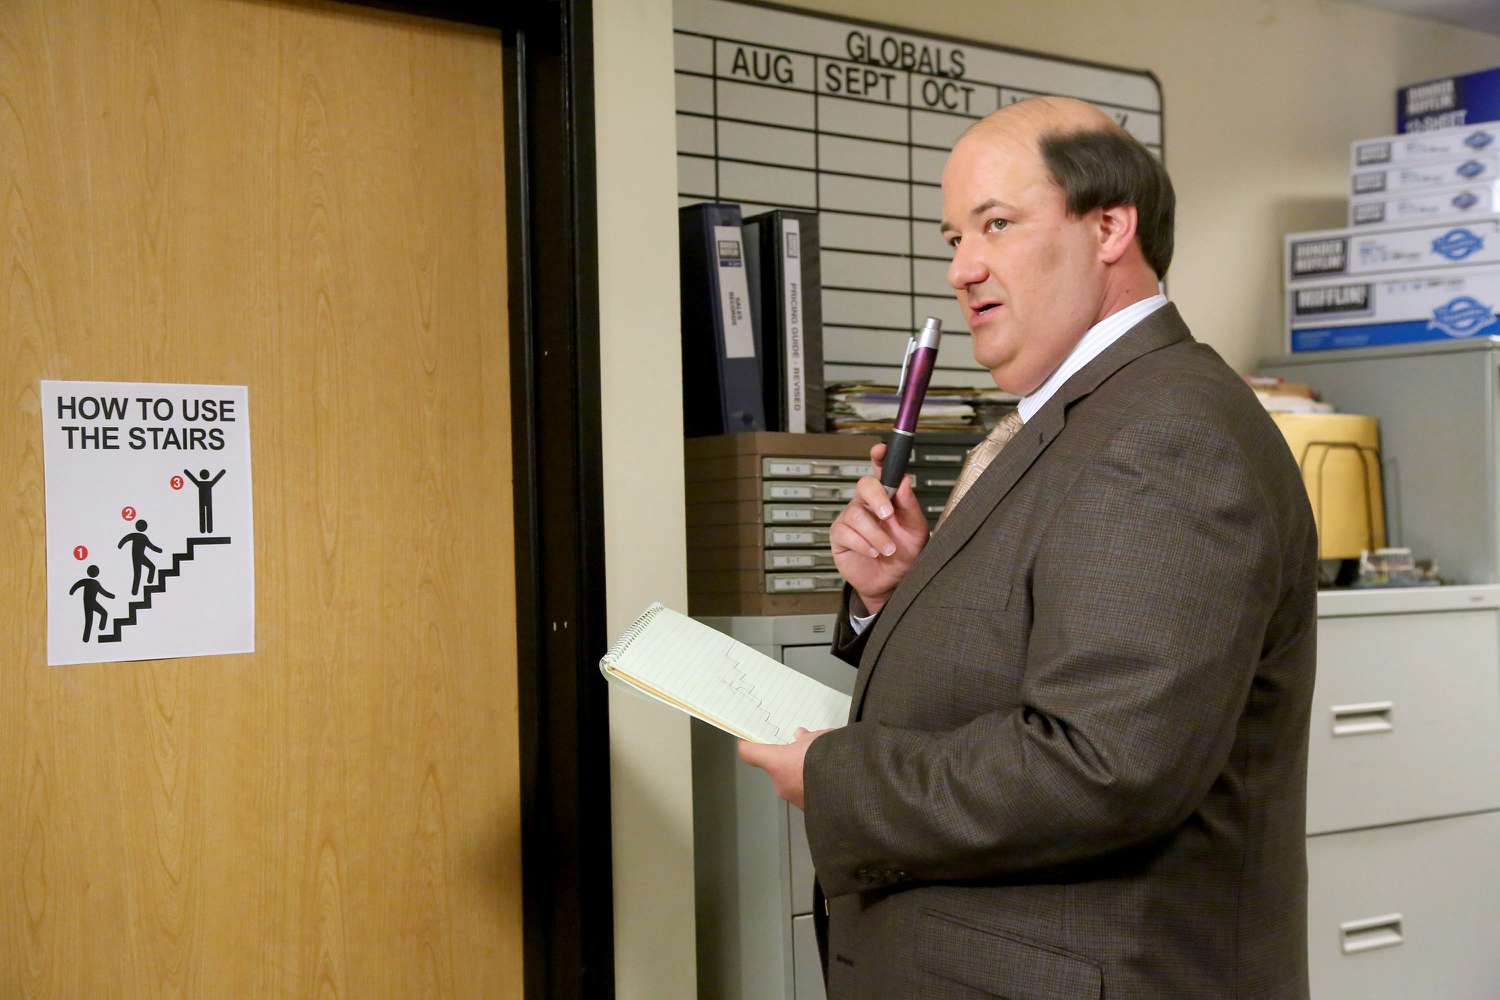 Brian Baumgartner Spills The Beans And Behind The Scenes Details Of That Famous Chili Scene From ‘The Office’